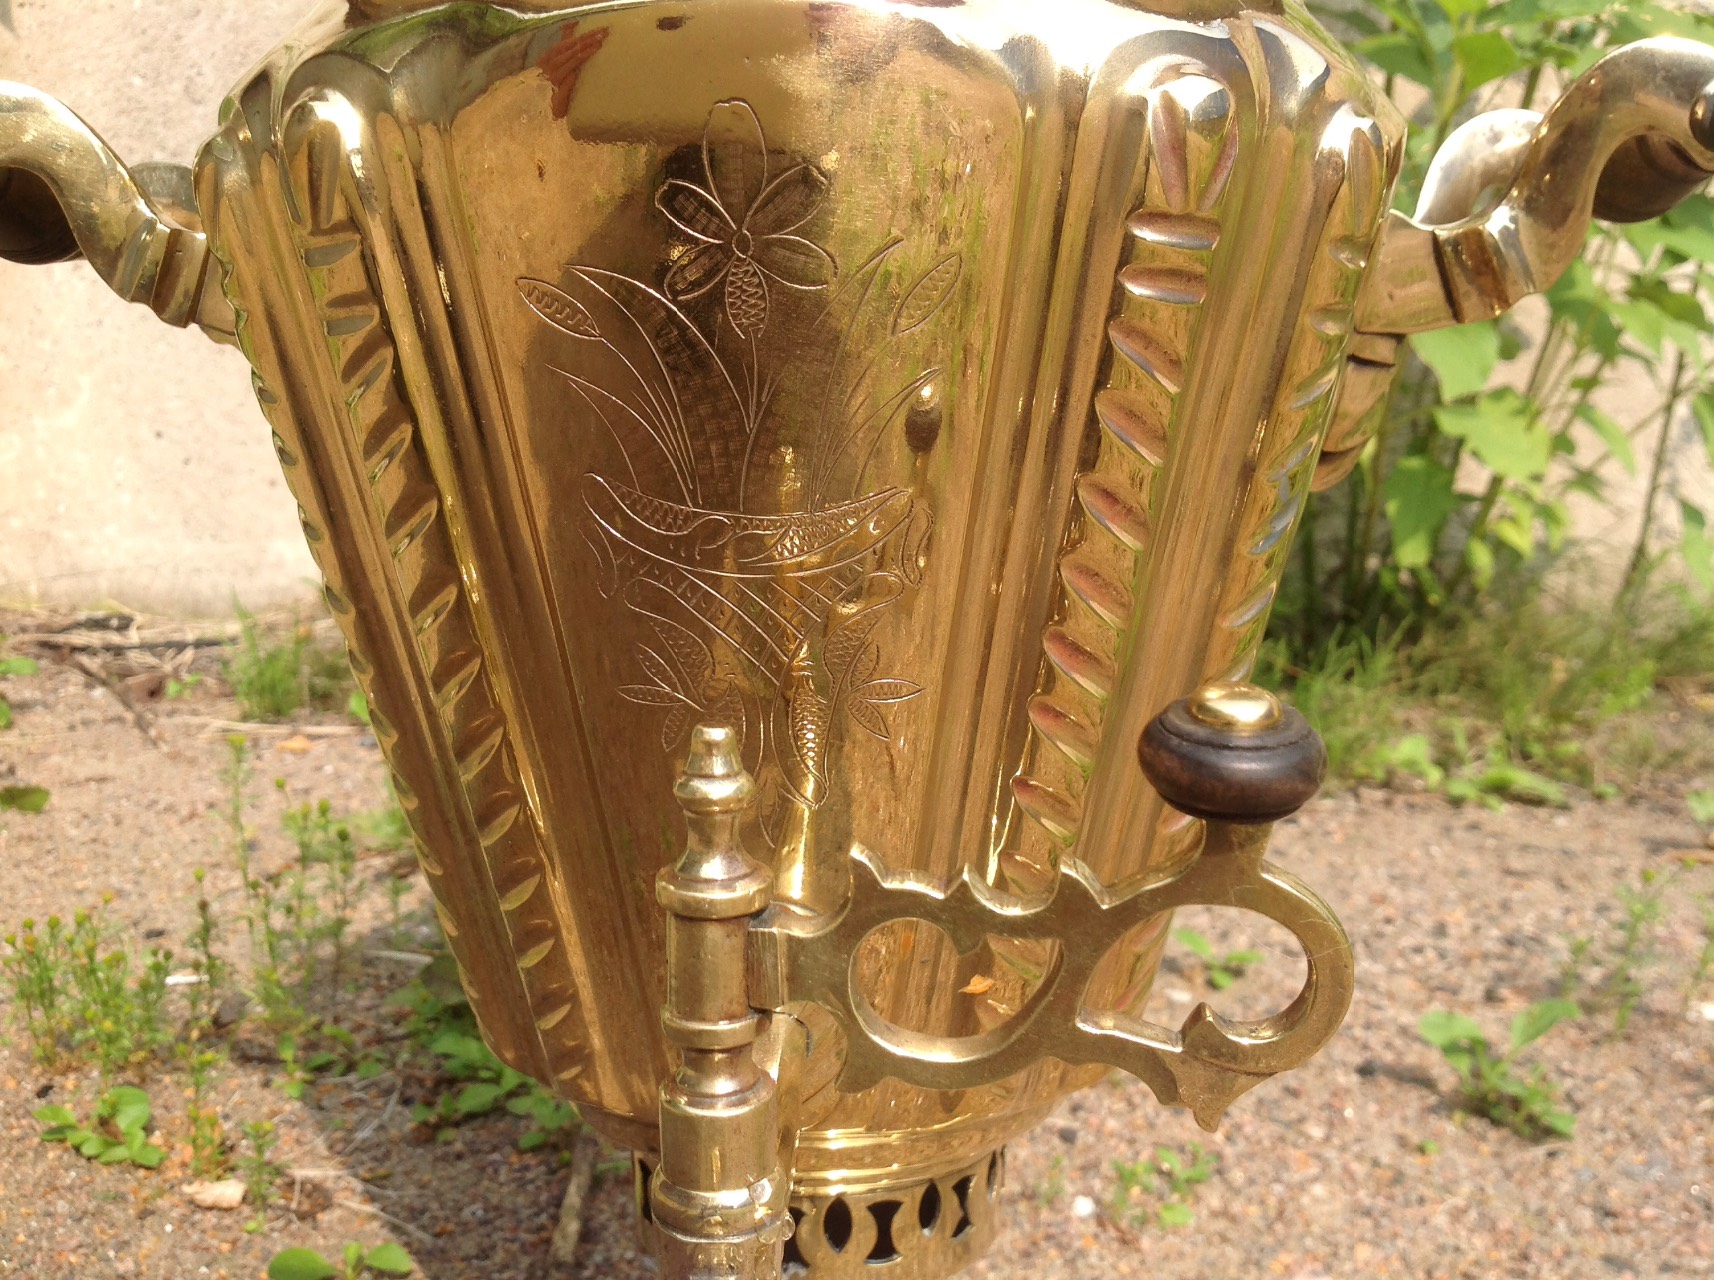 The middle part of the samovar